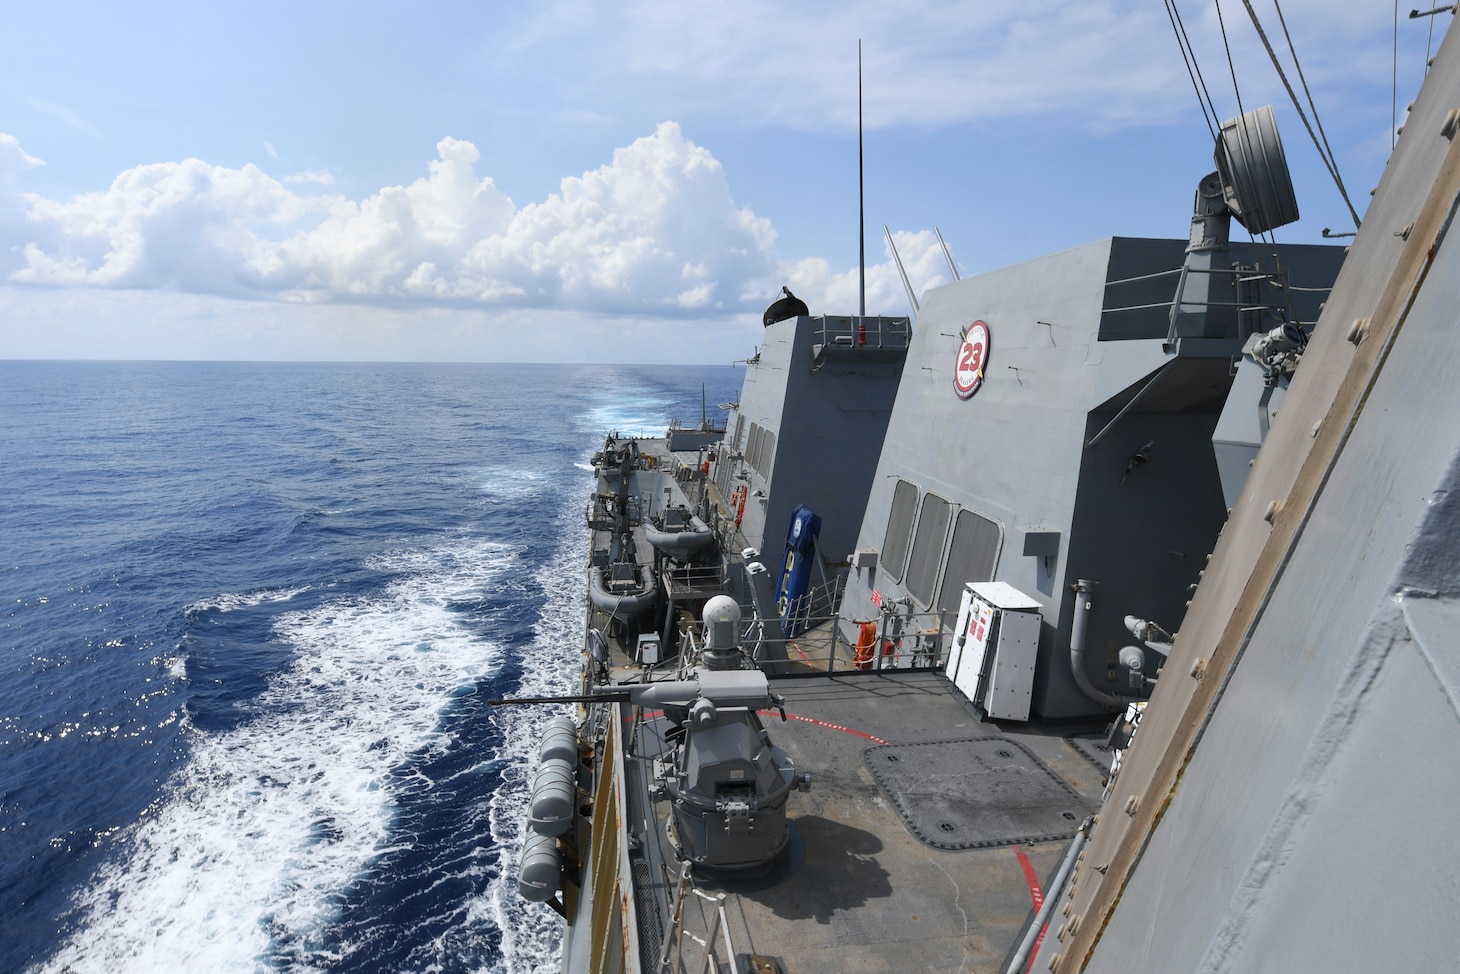 SOUTH CHINA SEA (May 10, 2024) The Arleigh Burke-class guided-missile destroyer USS Halsey (DDG 97) conducts routine underway operations in the South China Sea, May 10, 2024. Halsey is forward-deployed and assigned to Destroyer Squadron (DESRON) 15, the Navy’s largest DESRON and the U.S. 7th Fleet’s principal surface force. (U.S. Navy photo by Mass Communication Specialist 3rd Class Ismael Martinez)